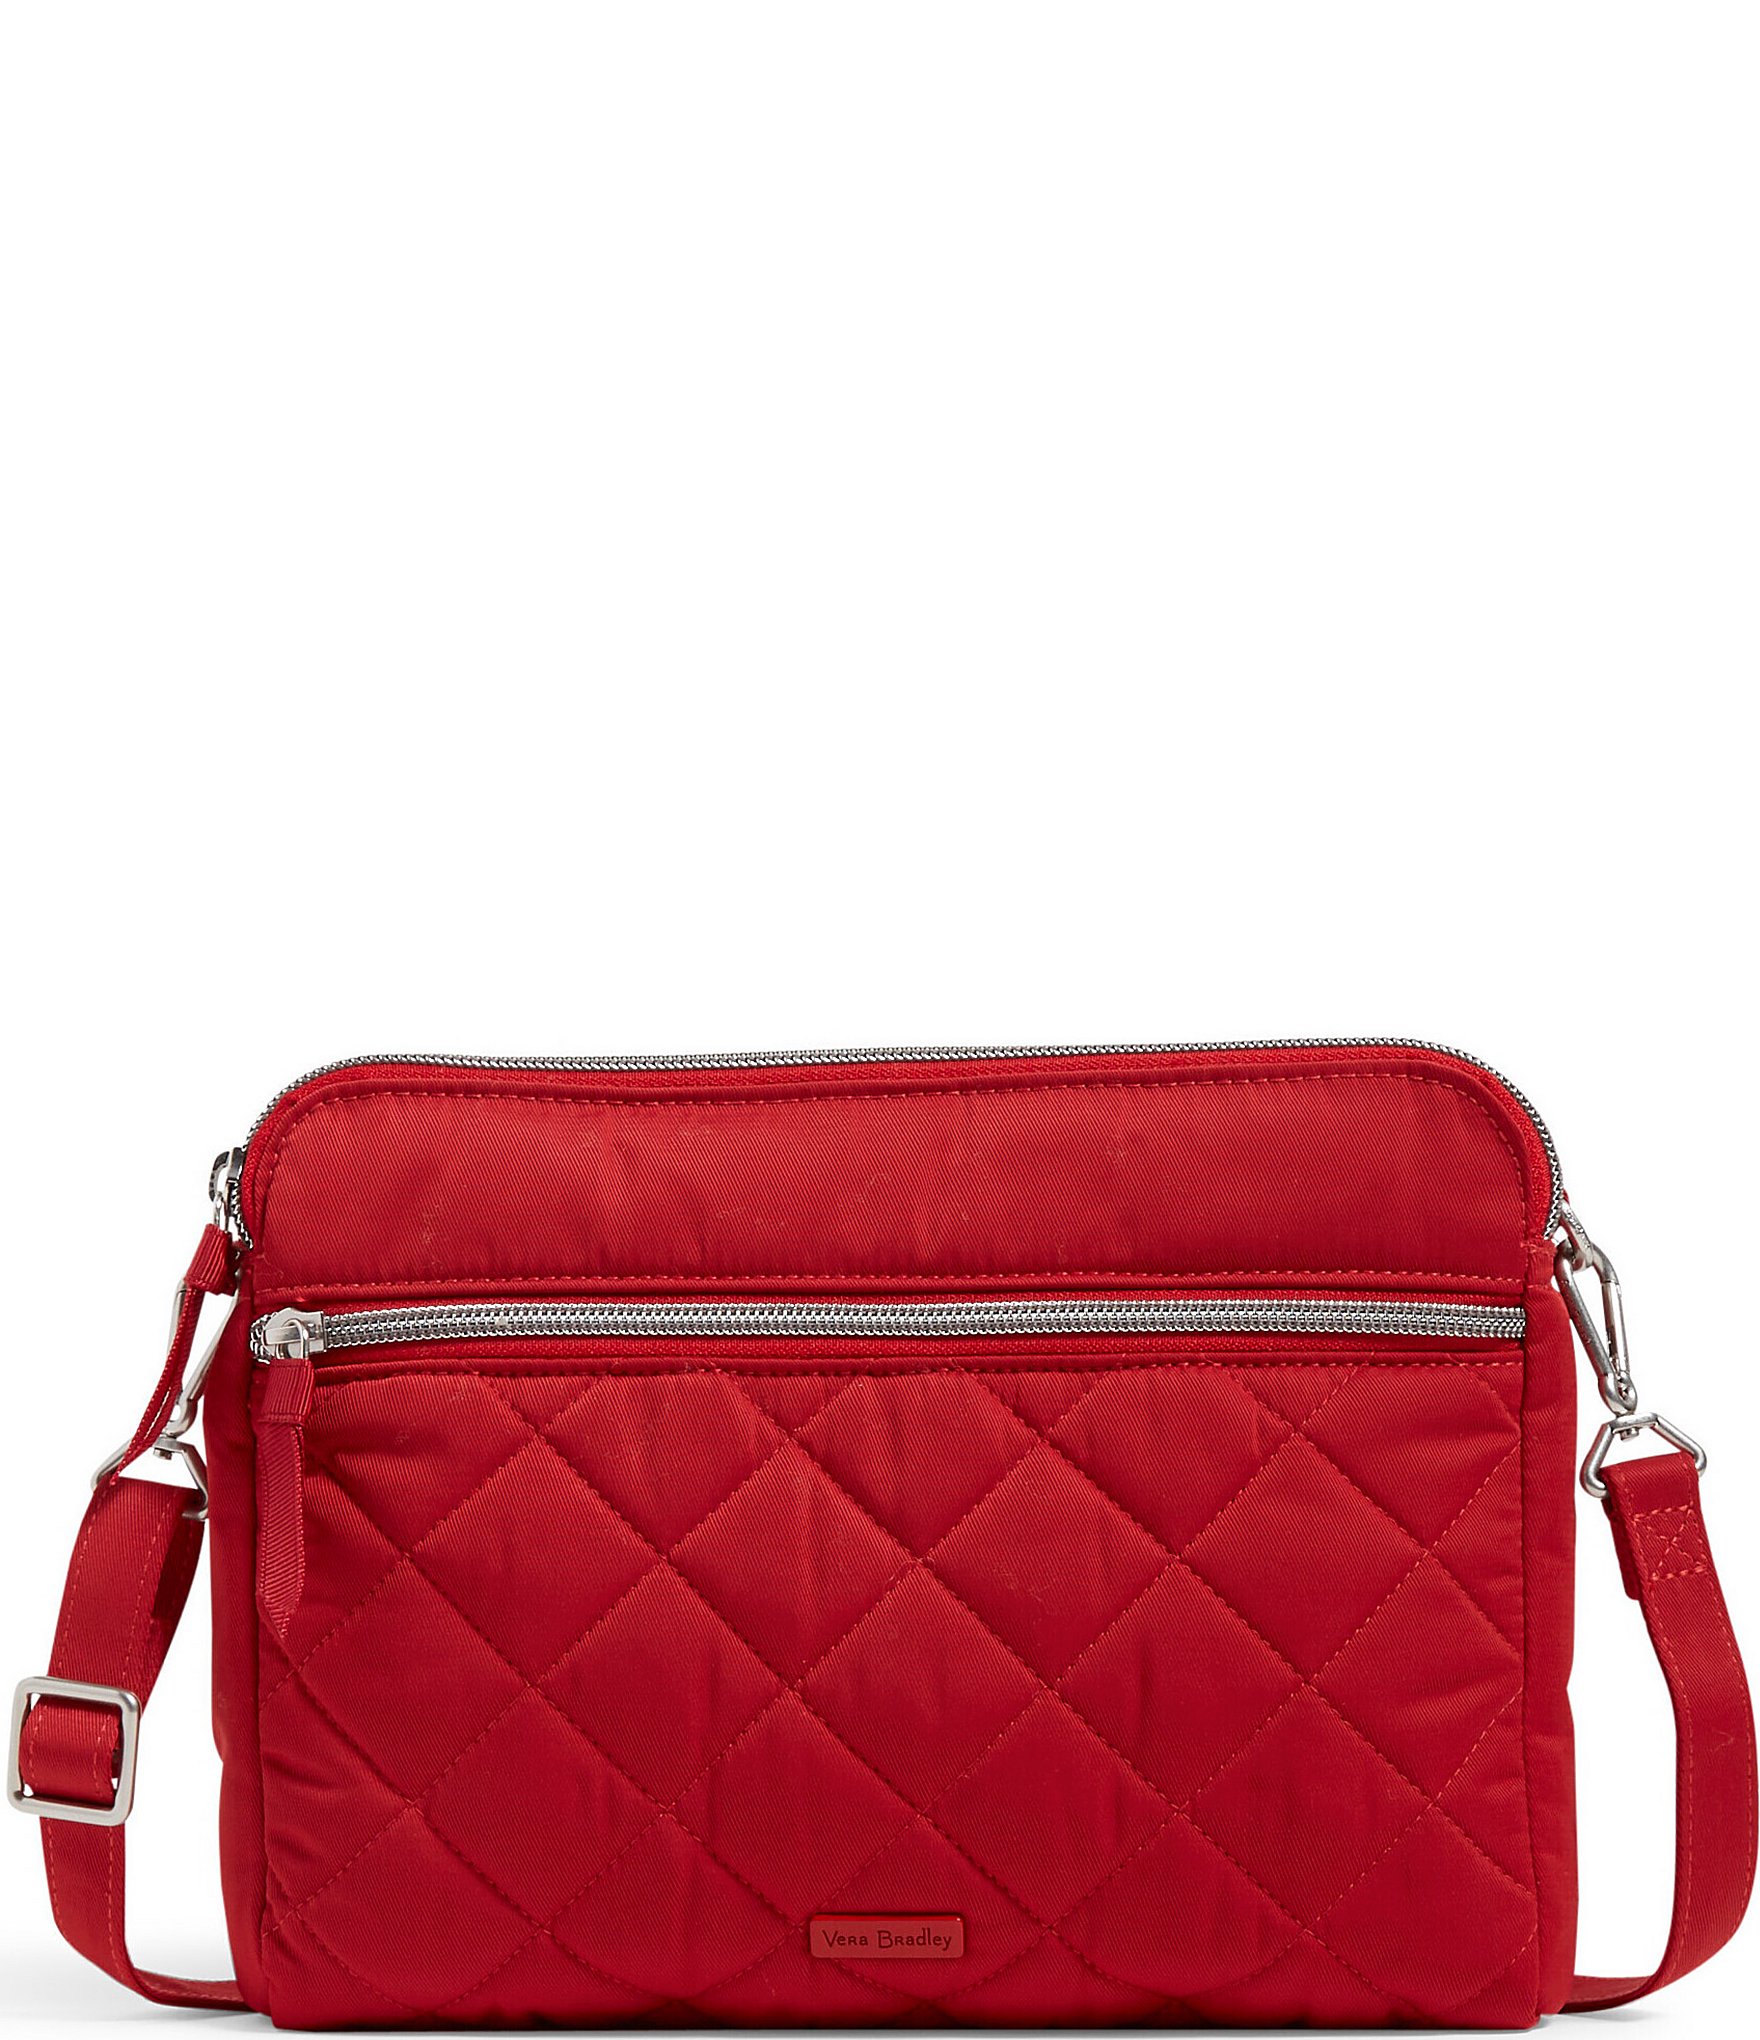 Vera Bradley Performance Twill Collection Triple Compartment Crossbody Bag - Cardinal Red